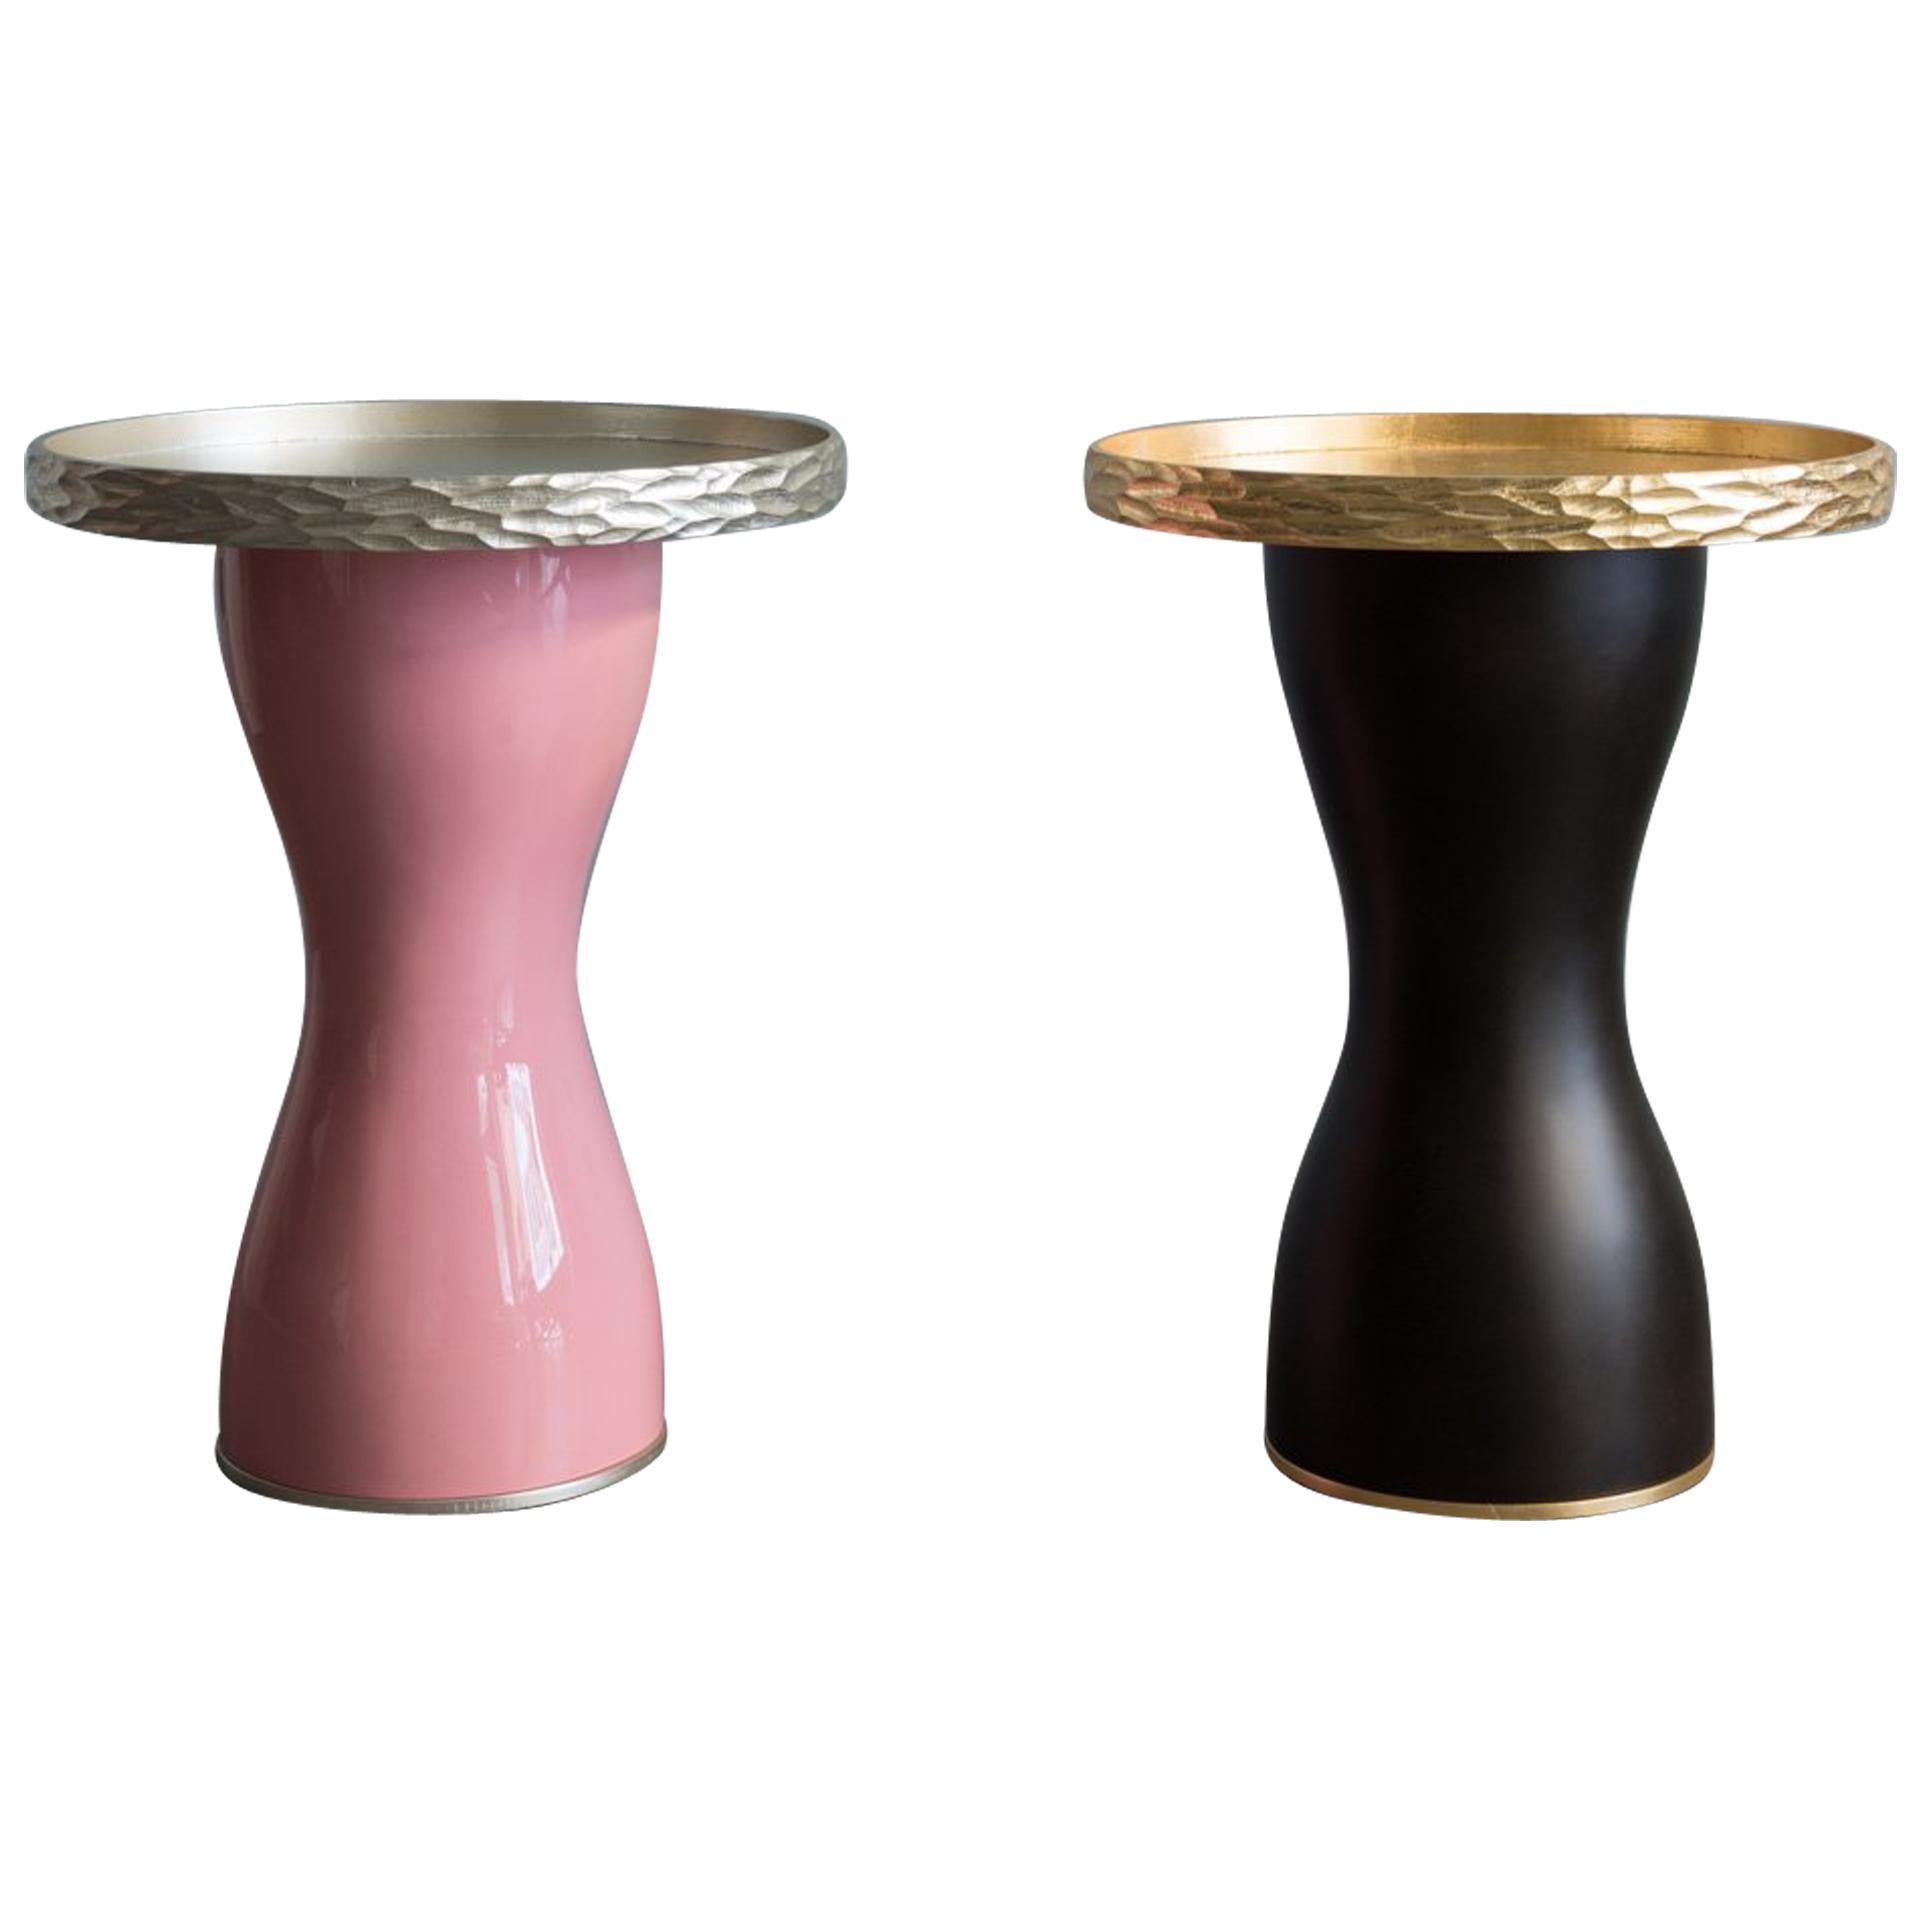 Uyoga Tray Side Table by Francis Sultana for Marc de Berny For Sale